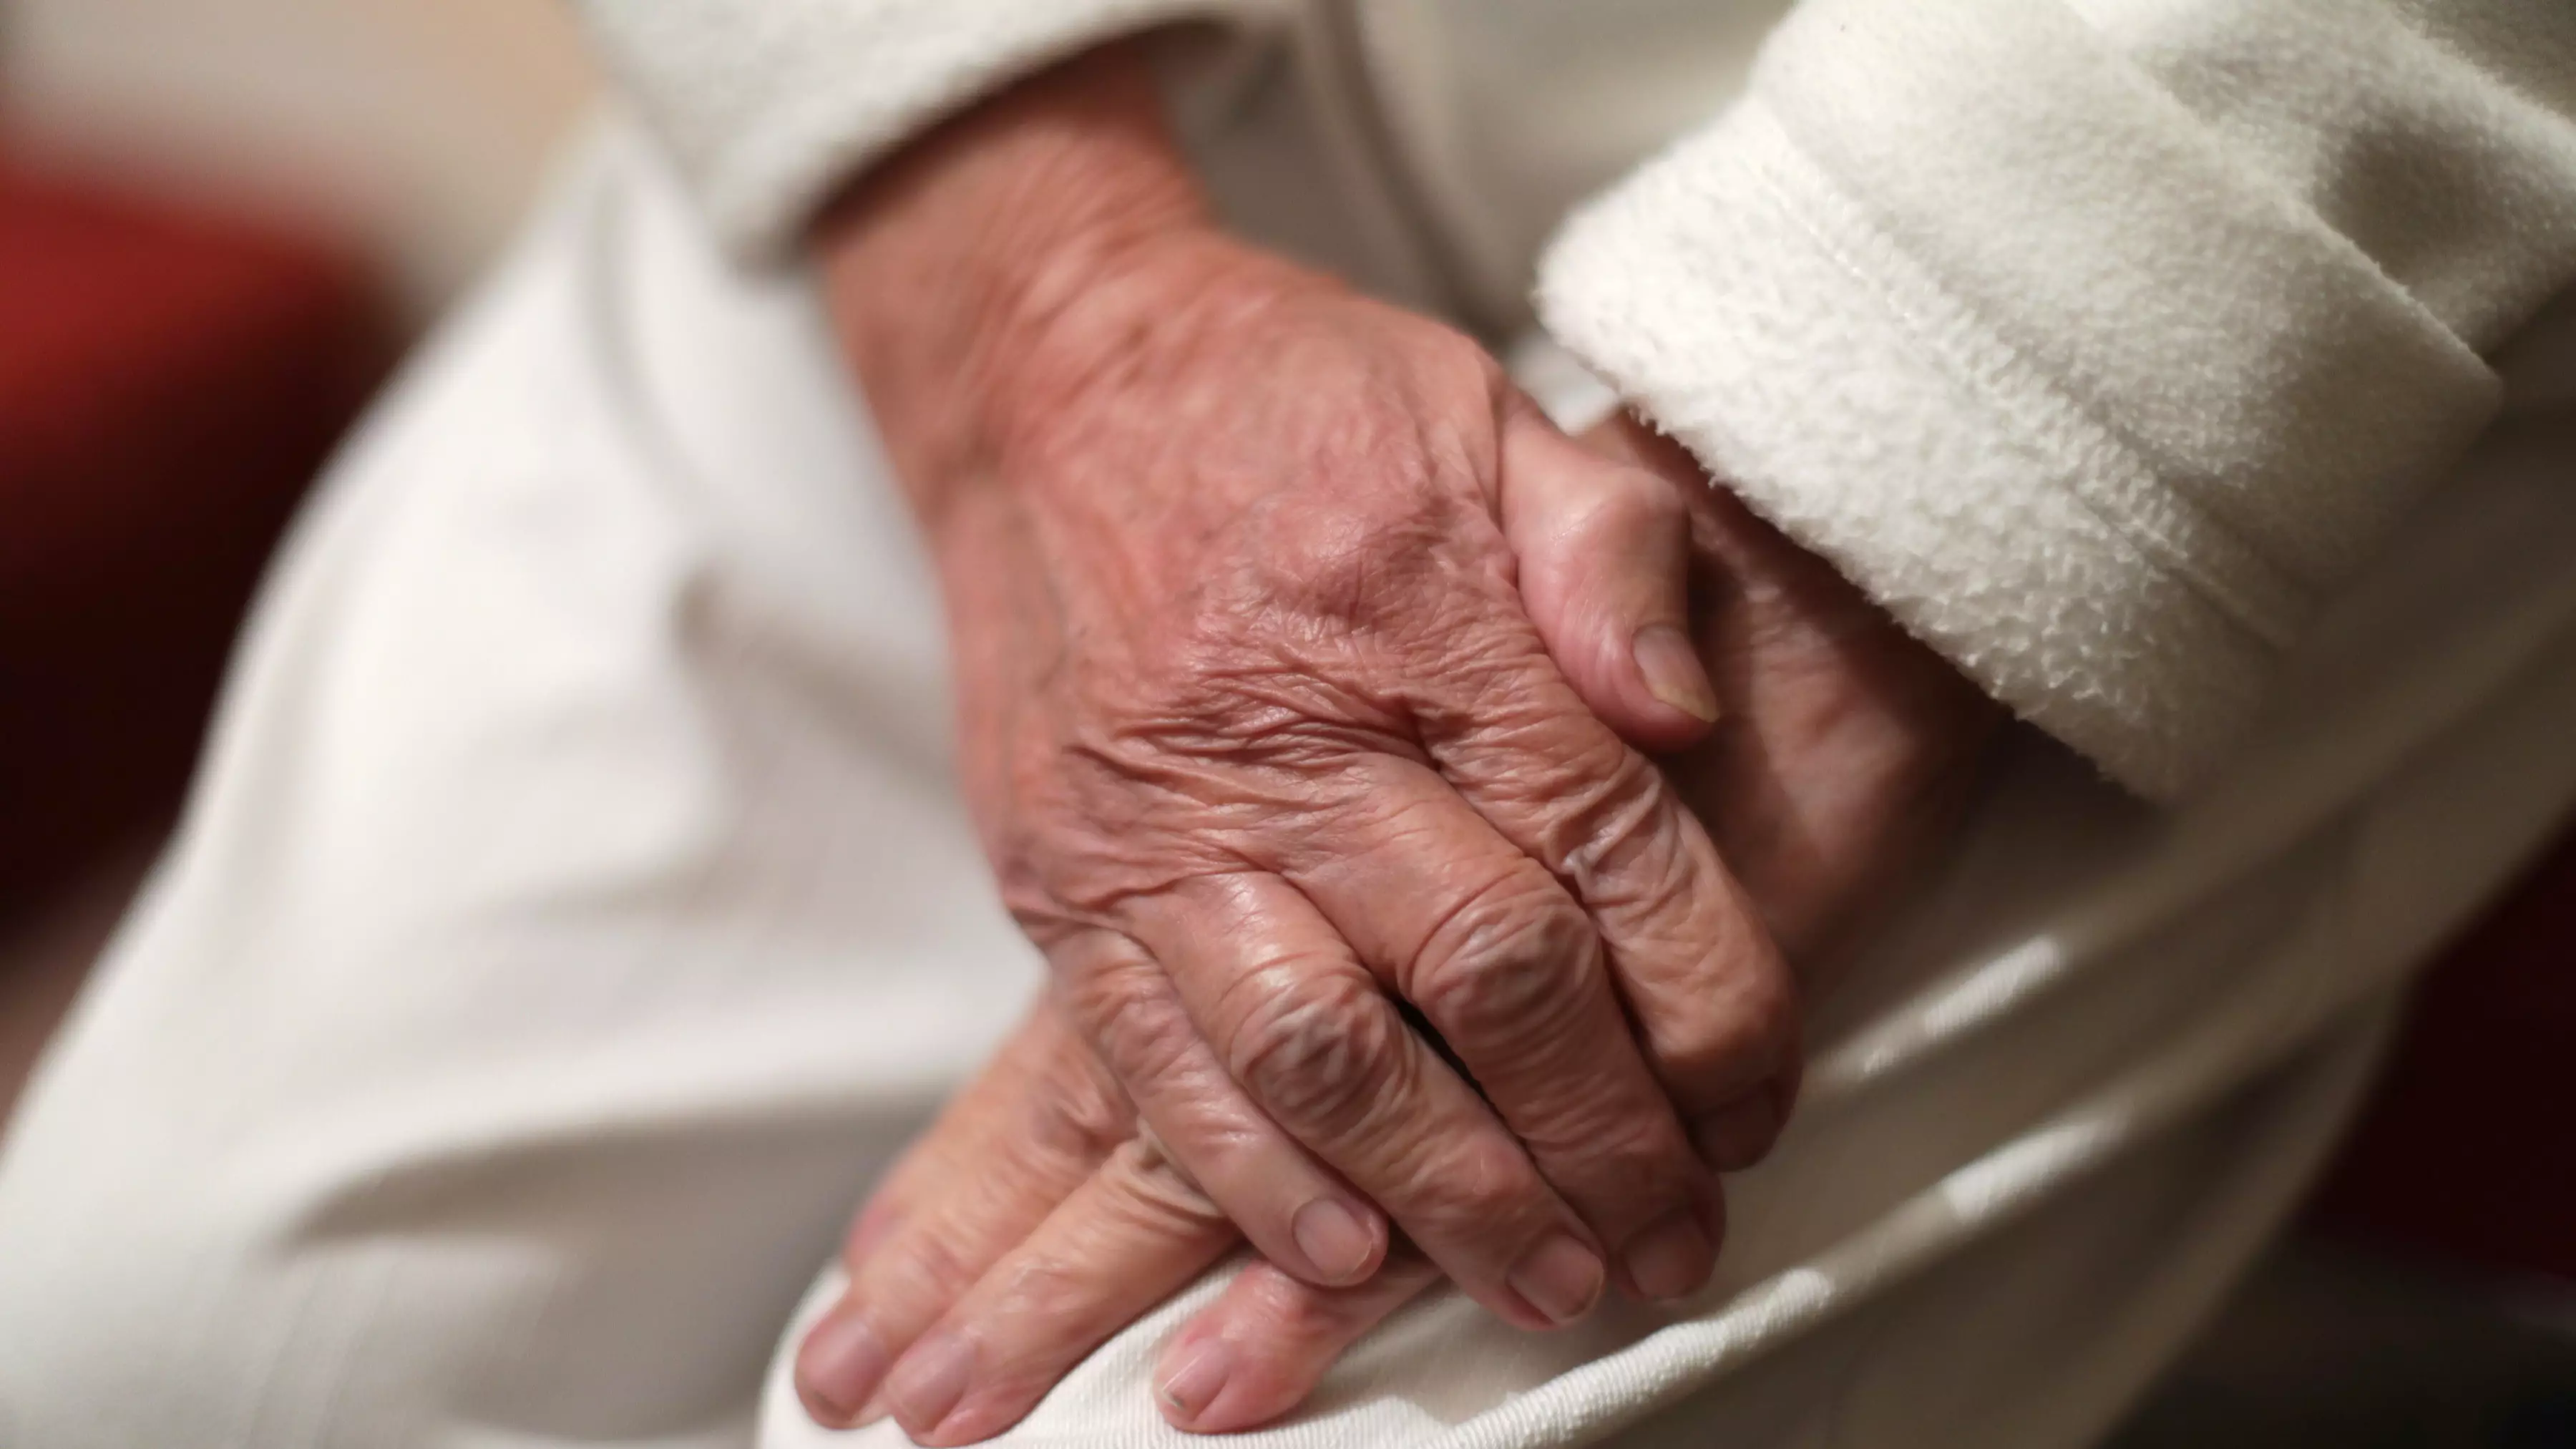 Nearly 50 Sexual Assaults Are Recorded At Australian Aged Care Homes Every Week